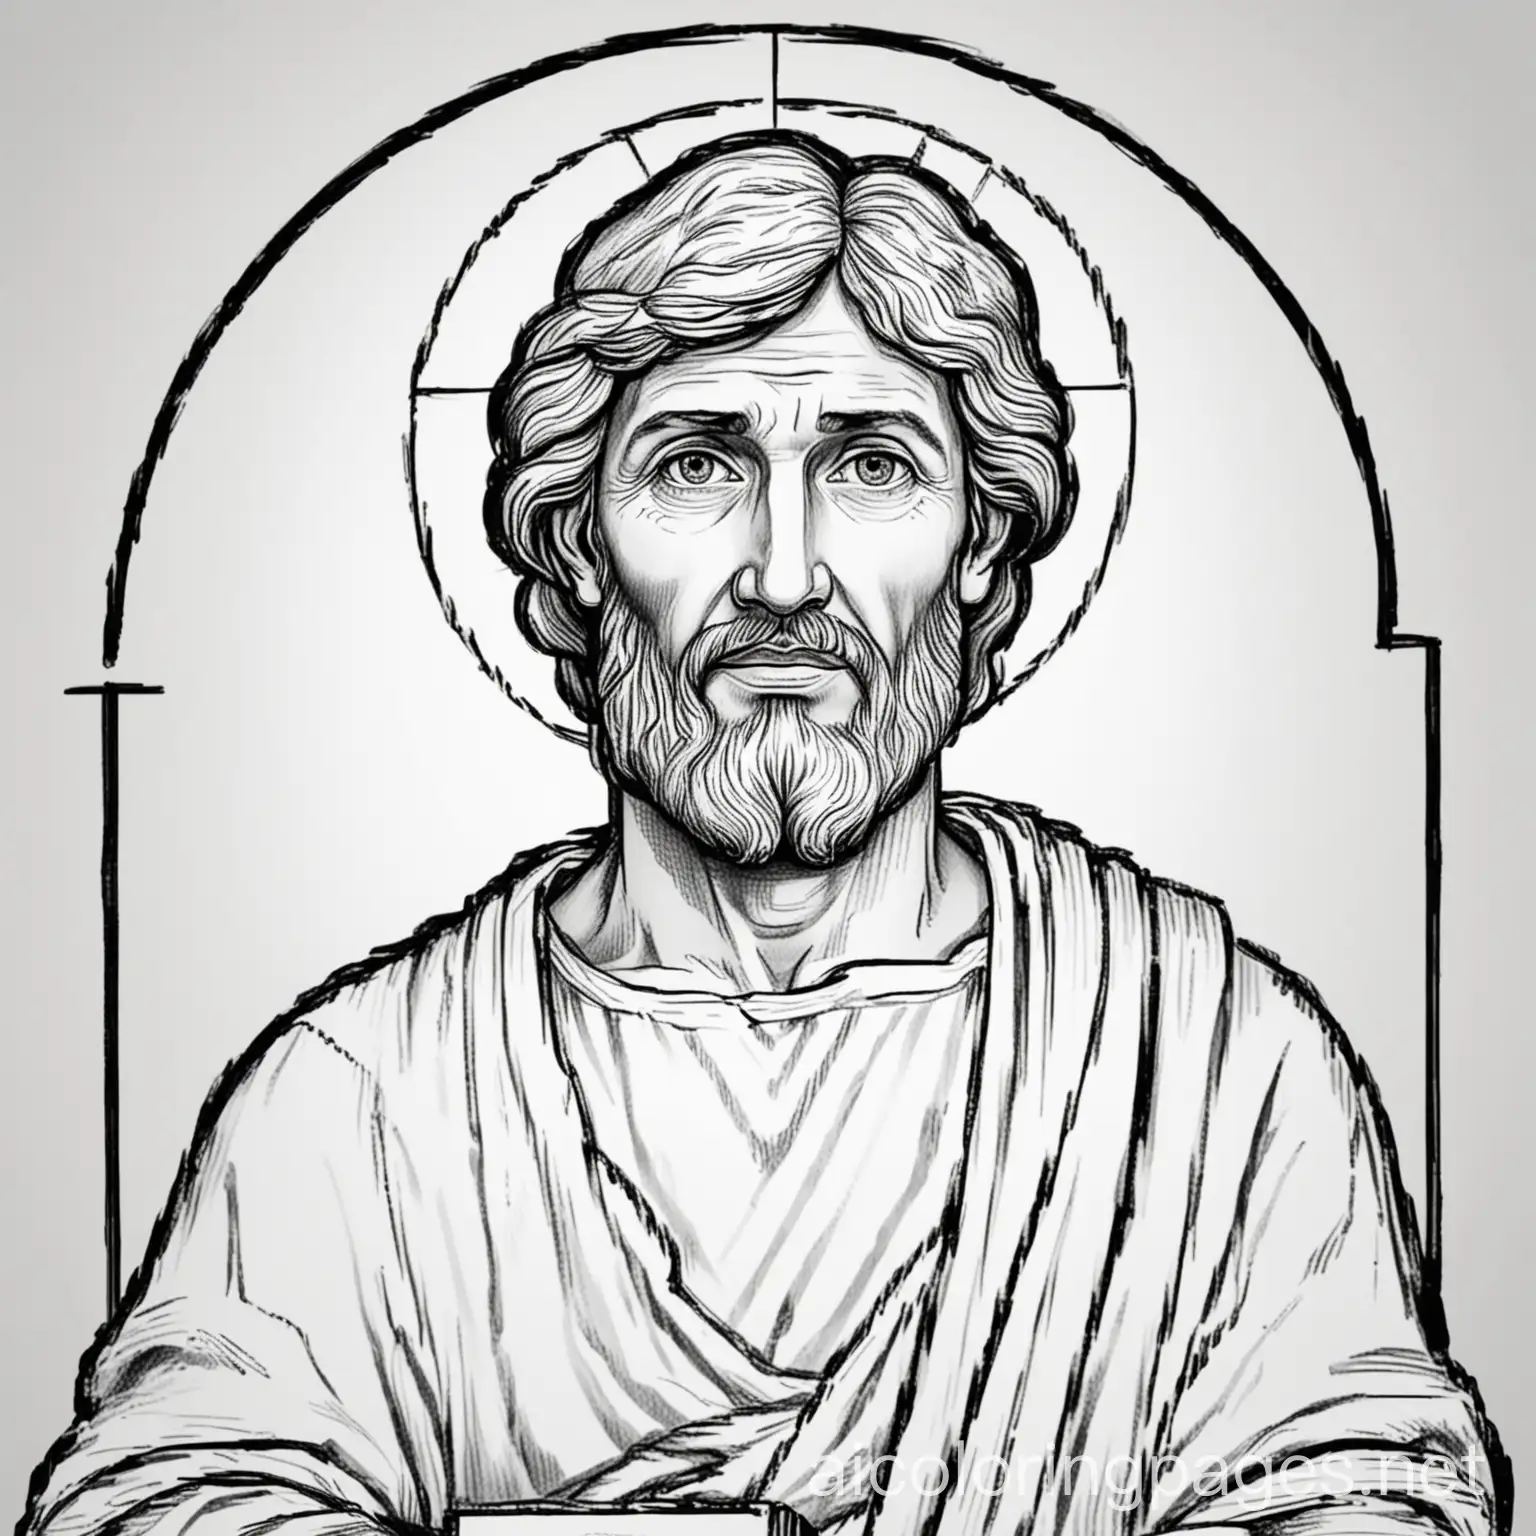 John the Apostle of the bible black and white no background, Coloring Page, black and white, line art, white background, Simplicity, Ample White Space. The background of the coloring page is plain white to make it easy for young children to color within the lines. The outlines of all the subjects are easy to distinguish, making it simple for kids to color without too much difficulty